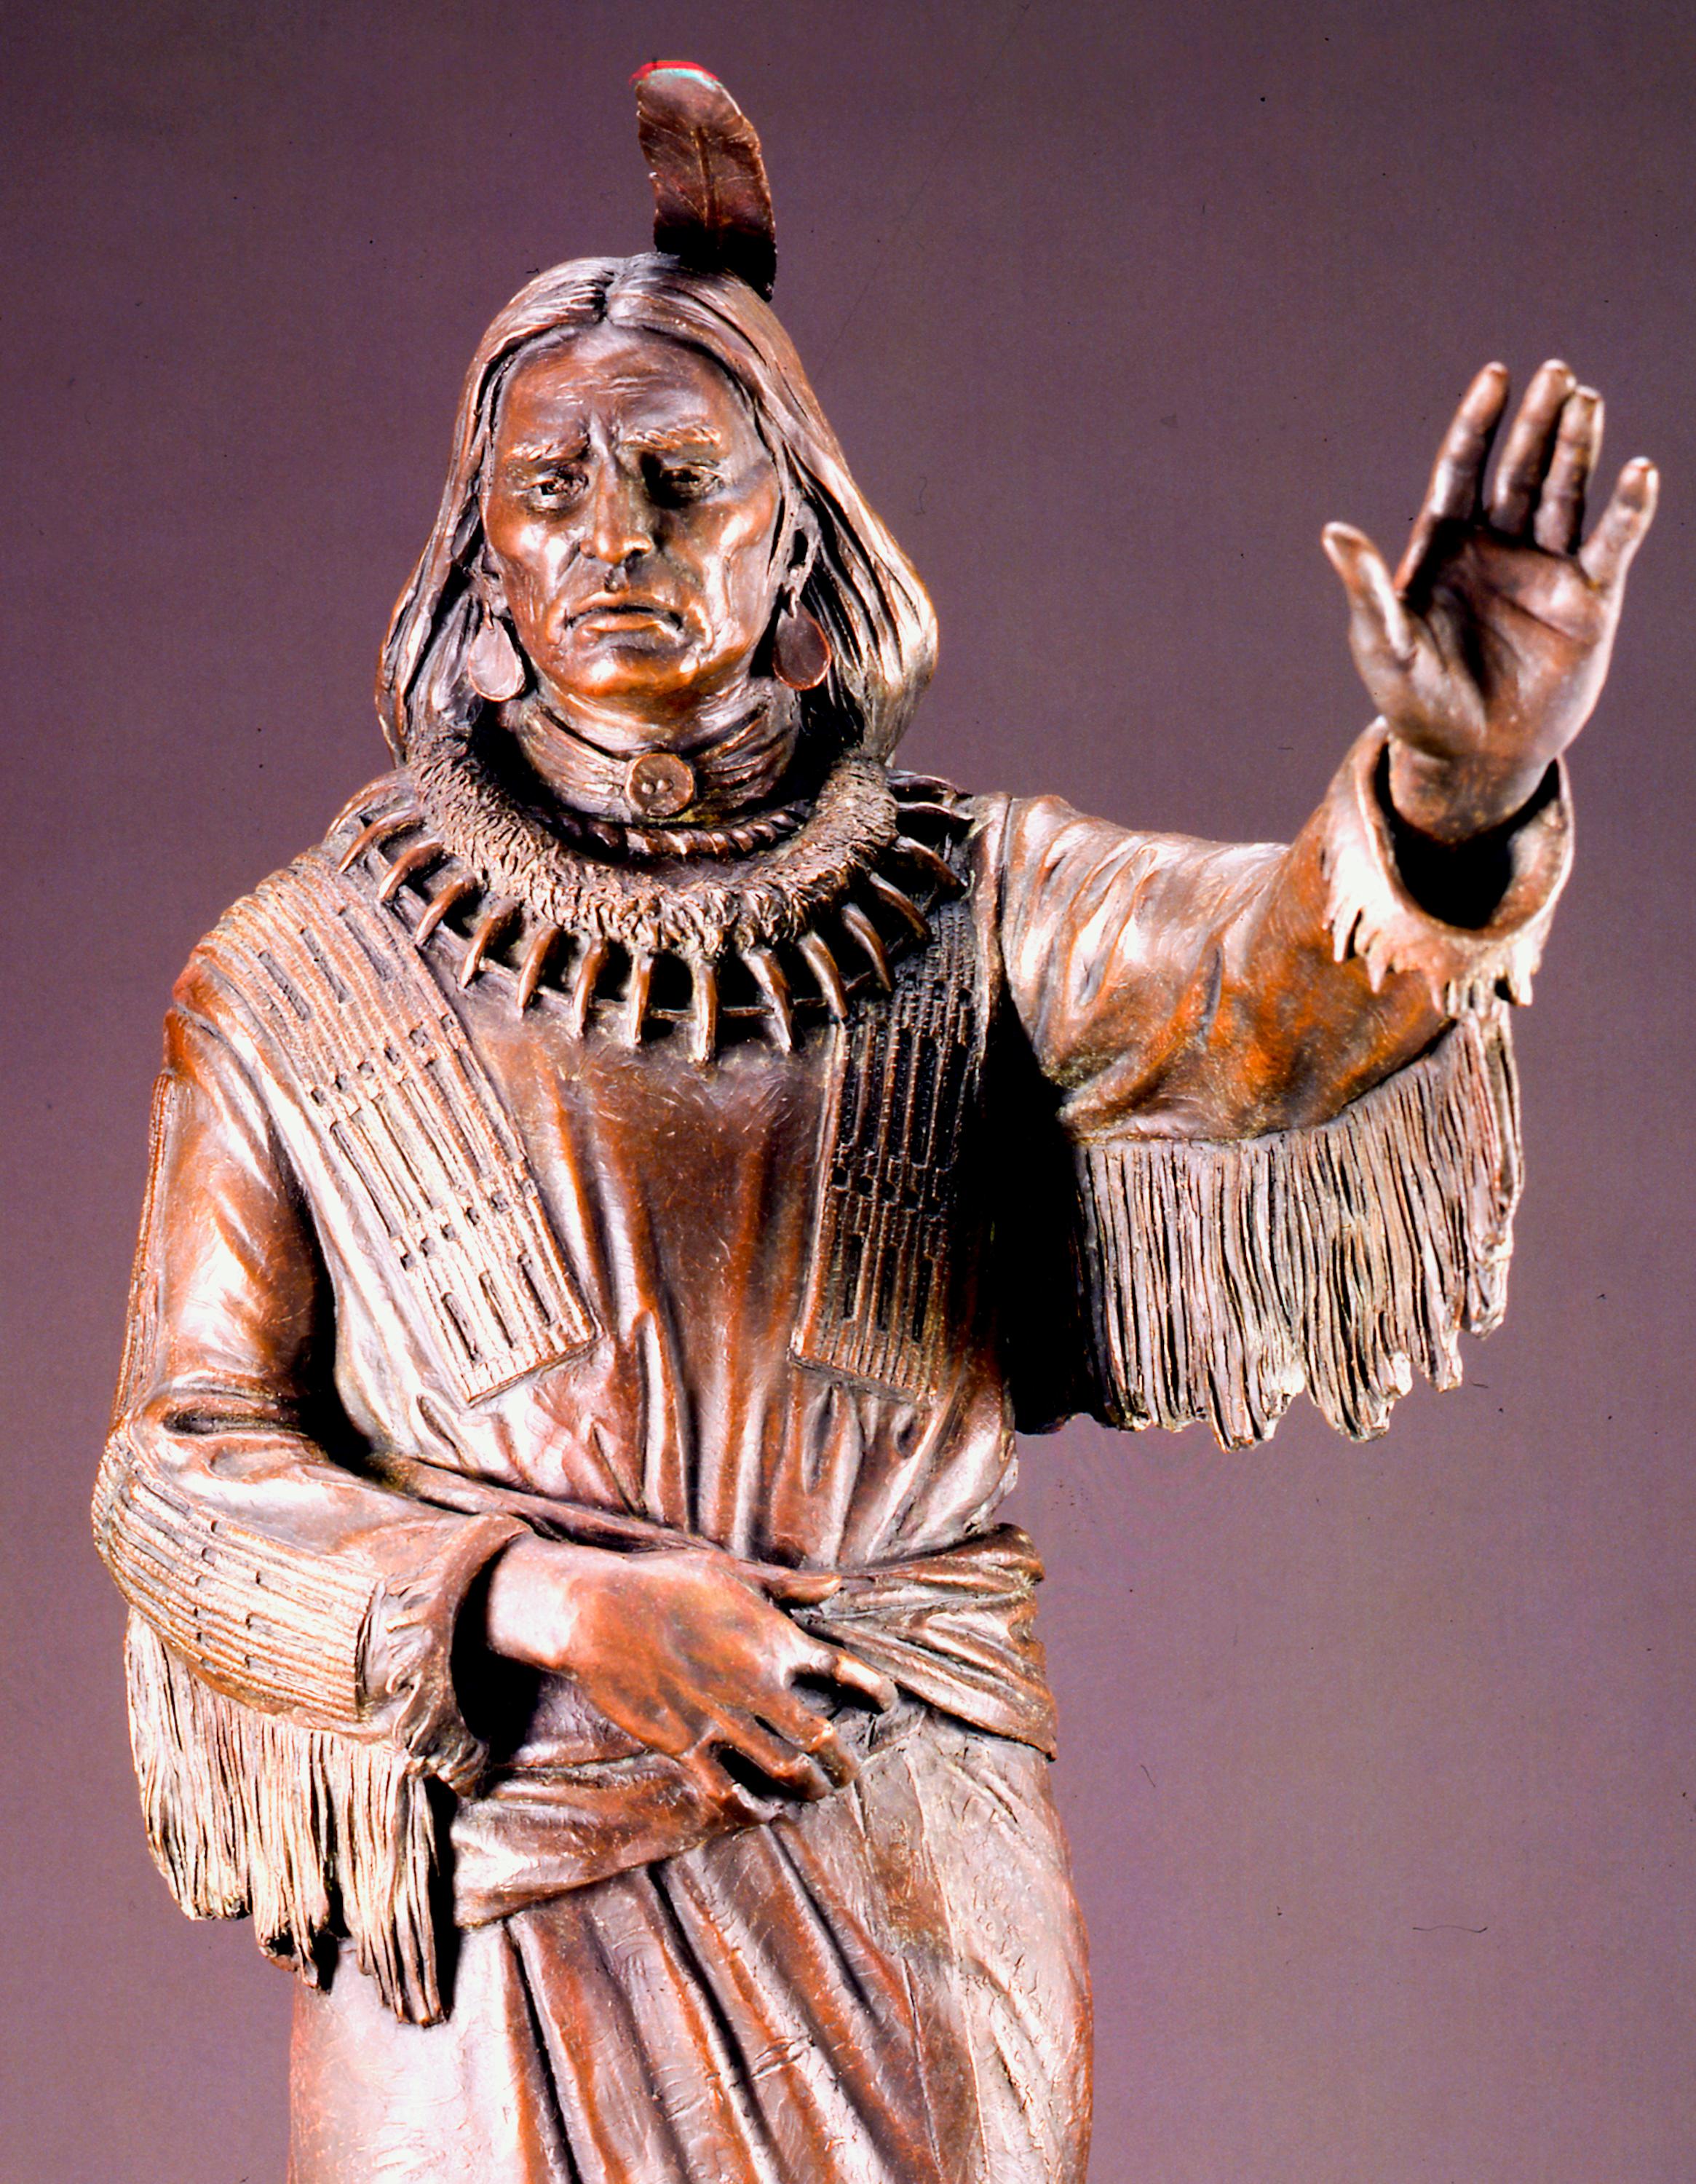 Standing Bear, Paul Moore Choctaw Ponca bronze sculpture realism western
limited bronze edition of 25
Standing Bear was born around 1829 in the traditional Ponca homeland near the confluence of the Niobrara and Missouri rivers. About thirty years